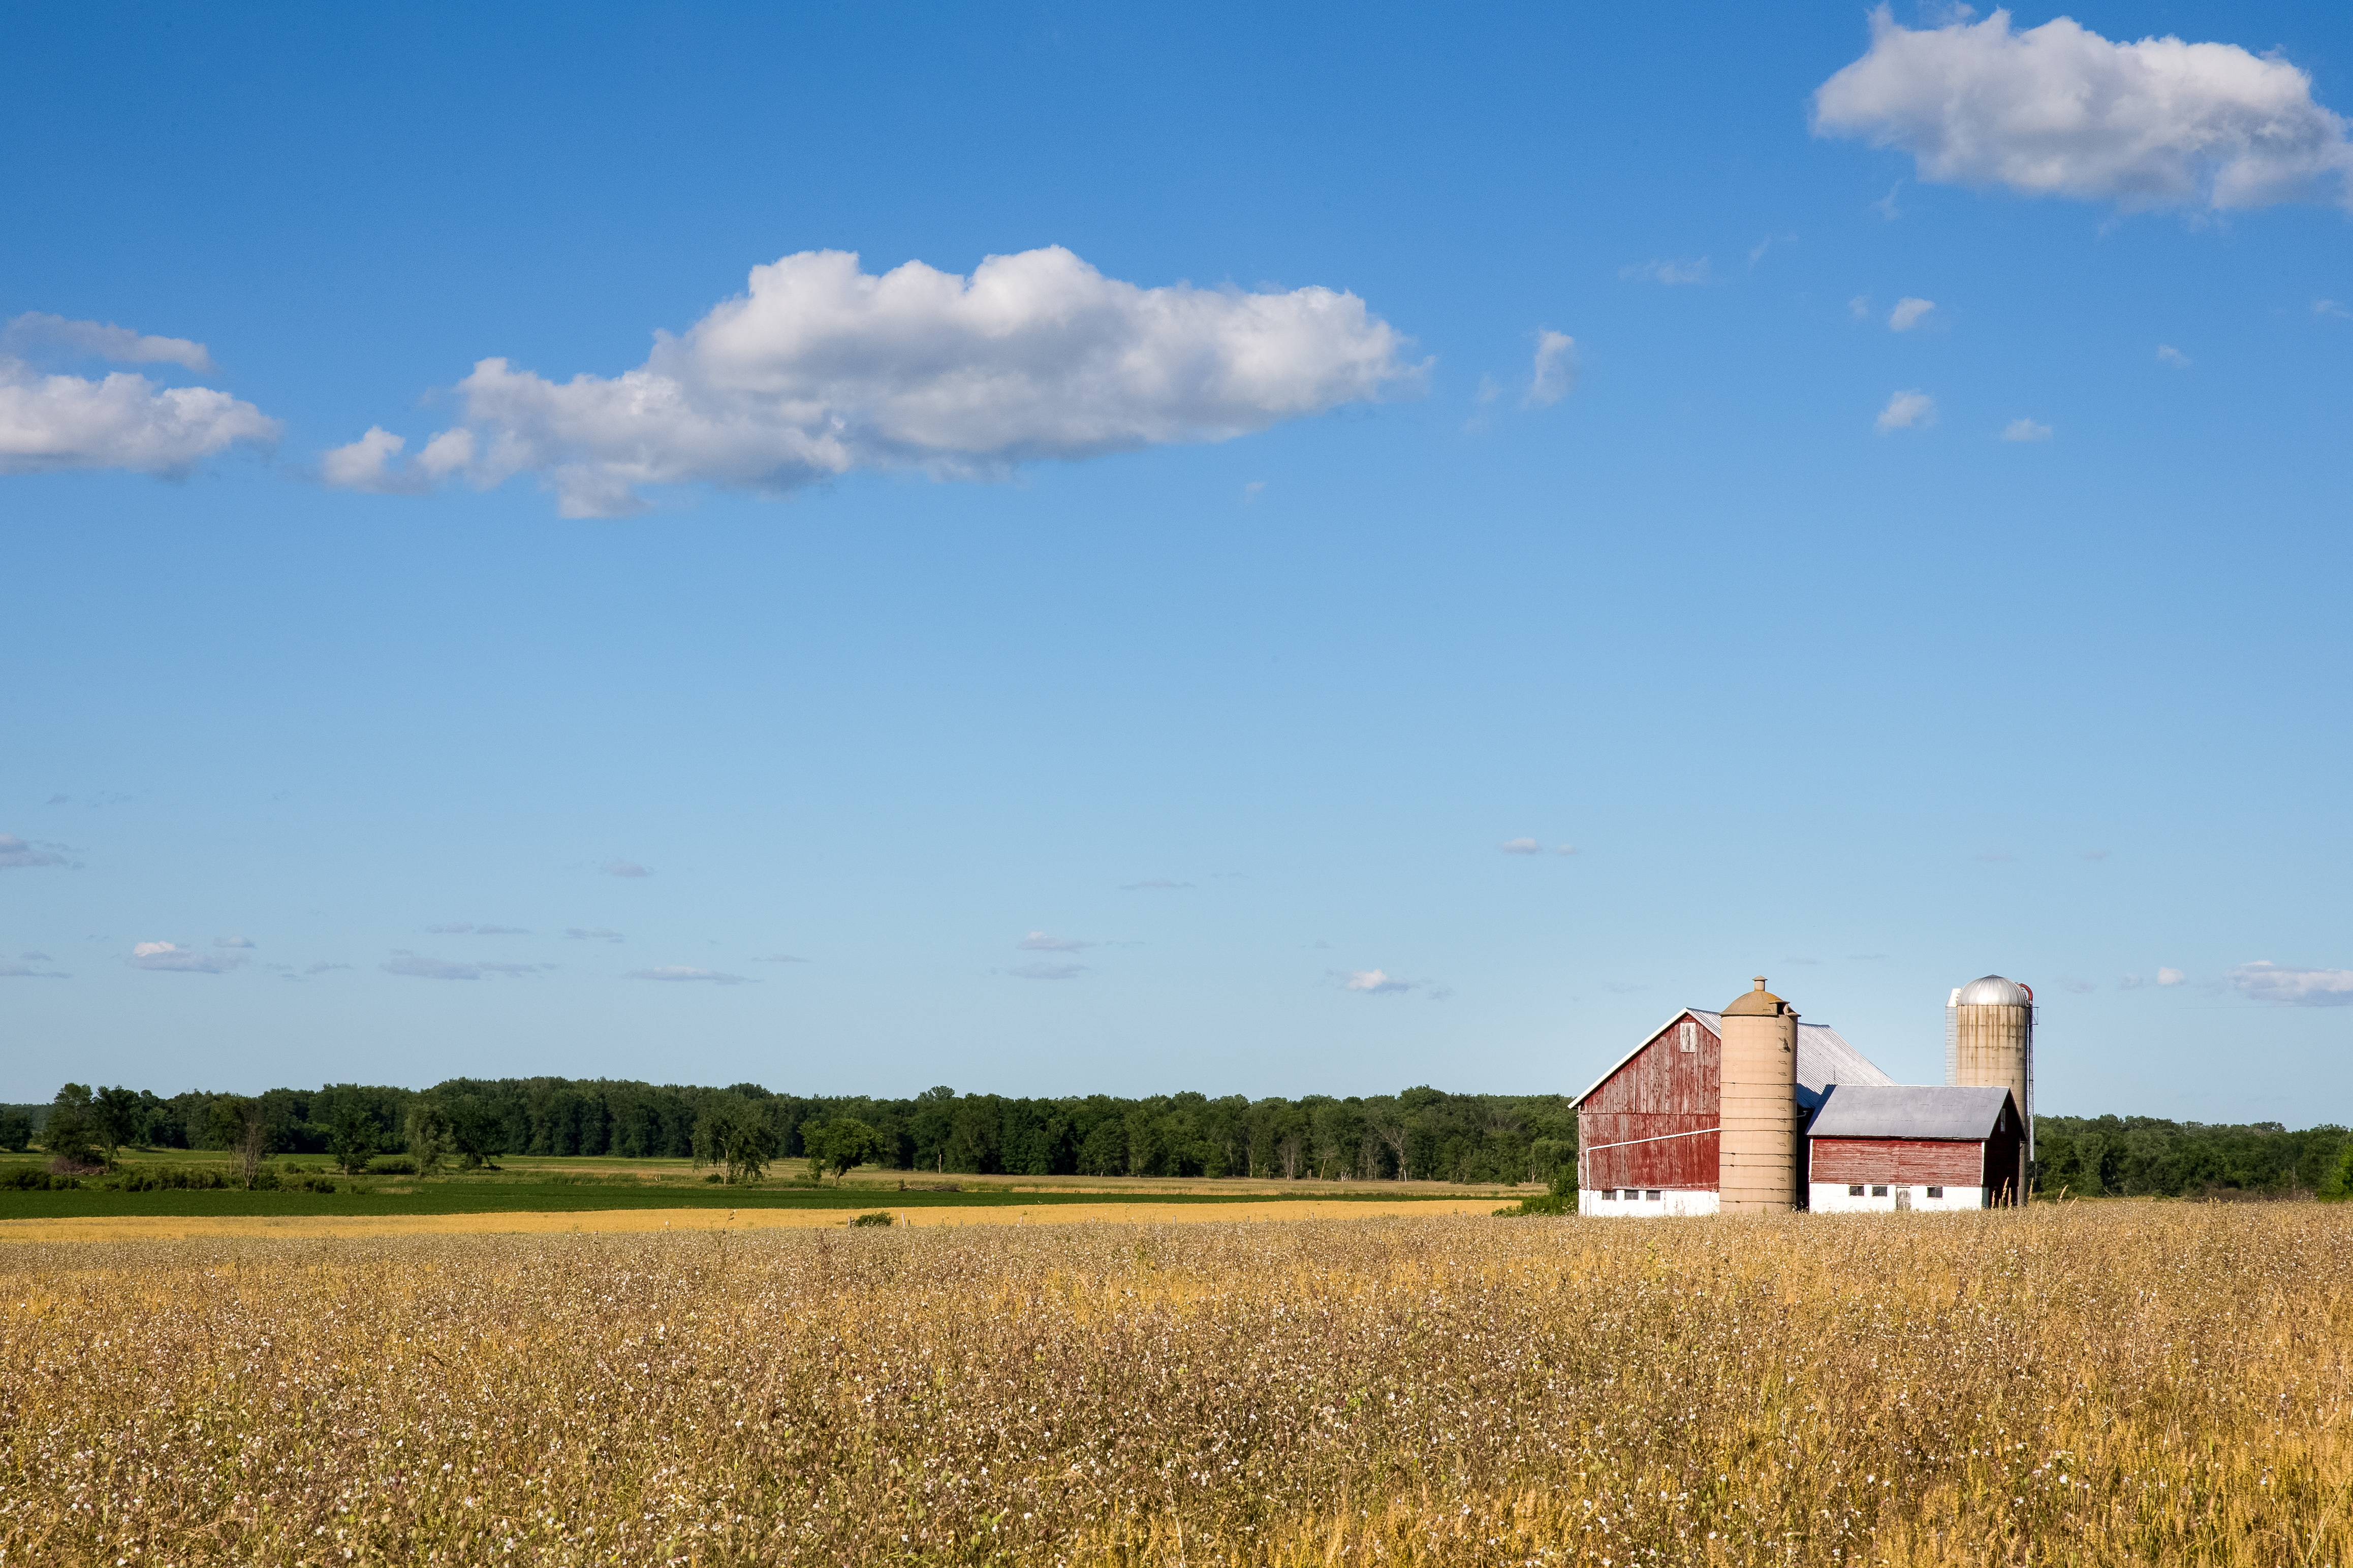 Classic rural farm scene with a weathered red barn silos golden crops and a blue sky